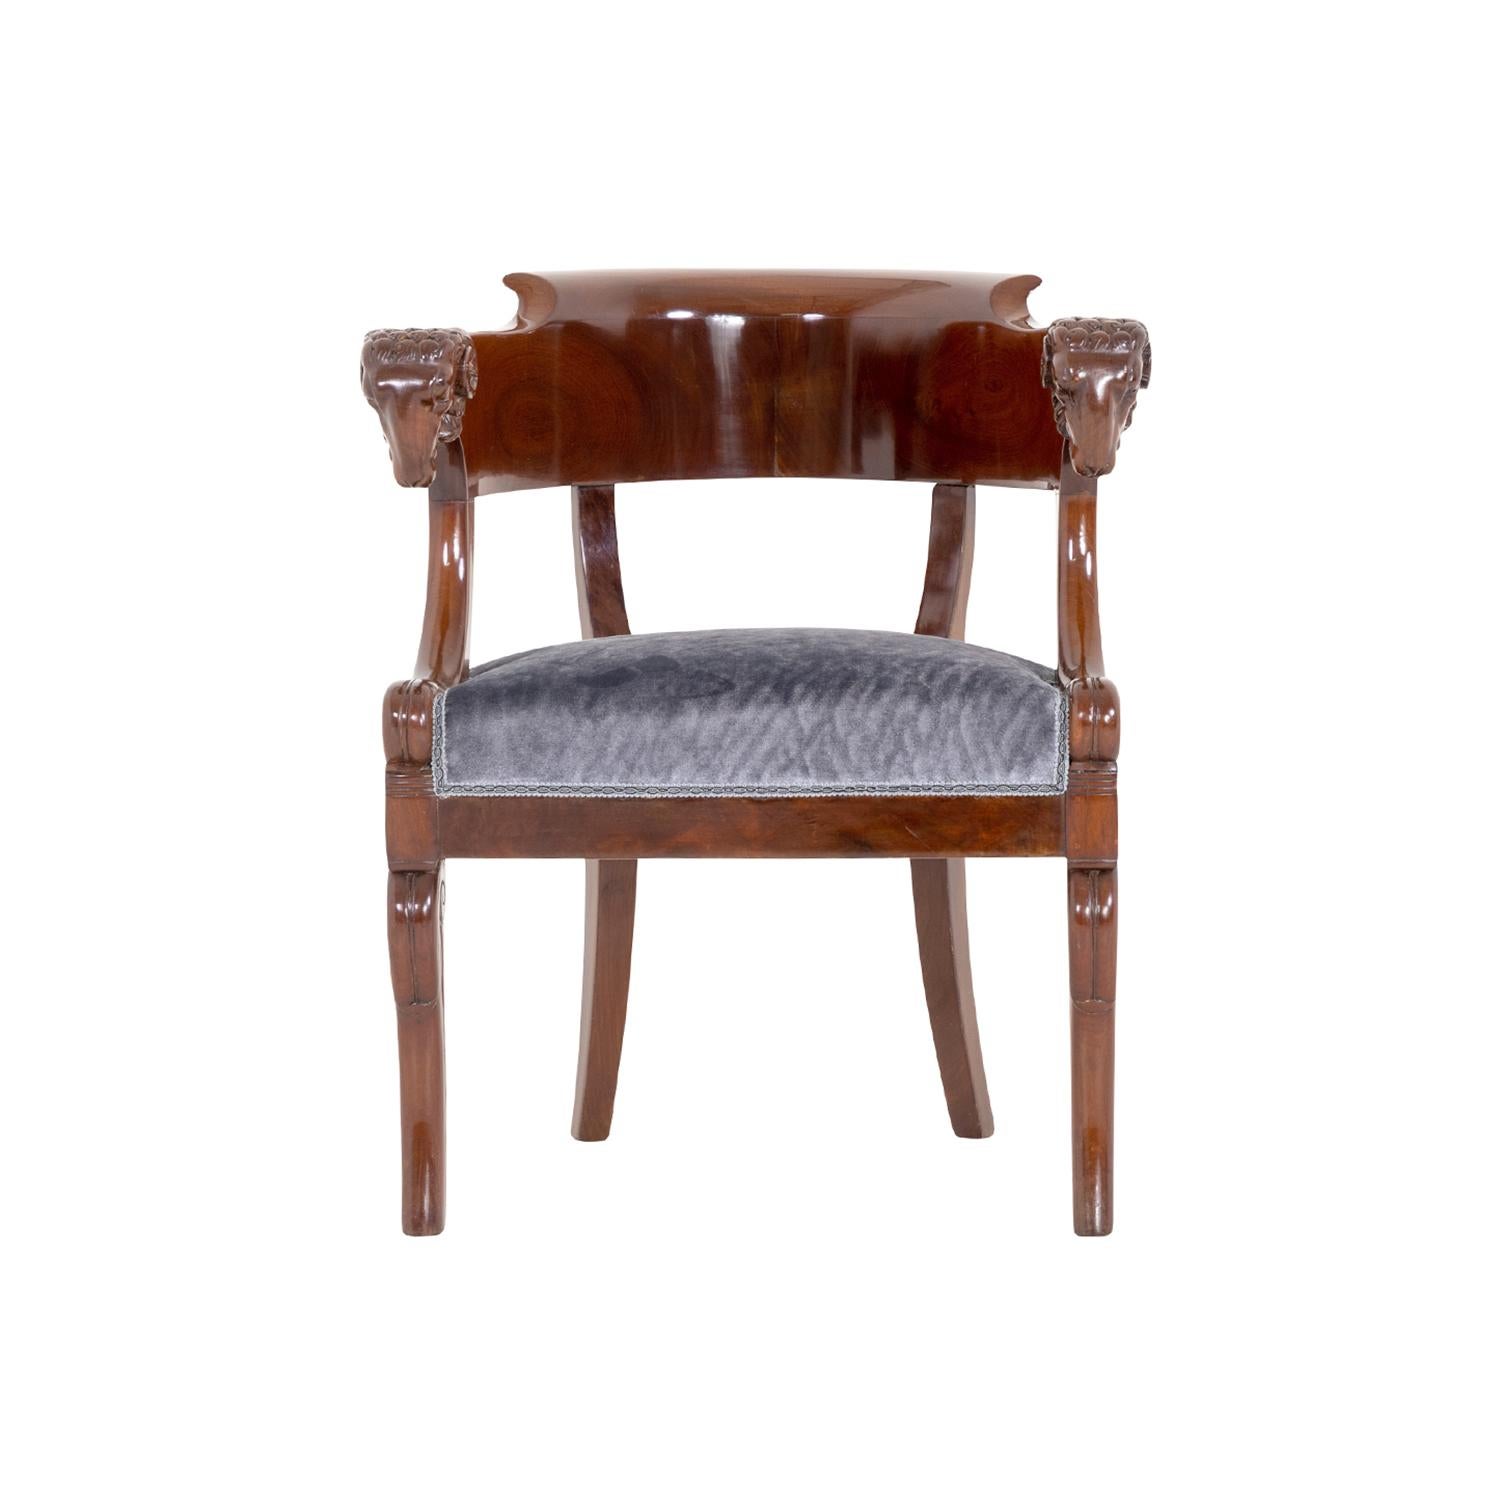 19th Century German Biedermeier Polished Mahogany Armchair - Antique Side Chair In Good Condition For Sale In West Palm Beach, FL